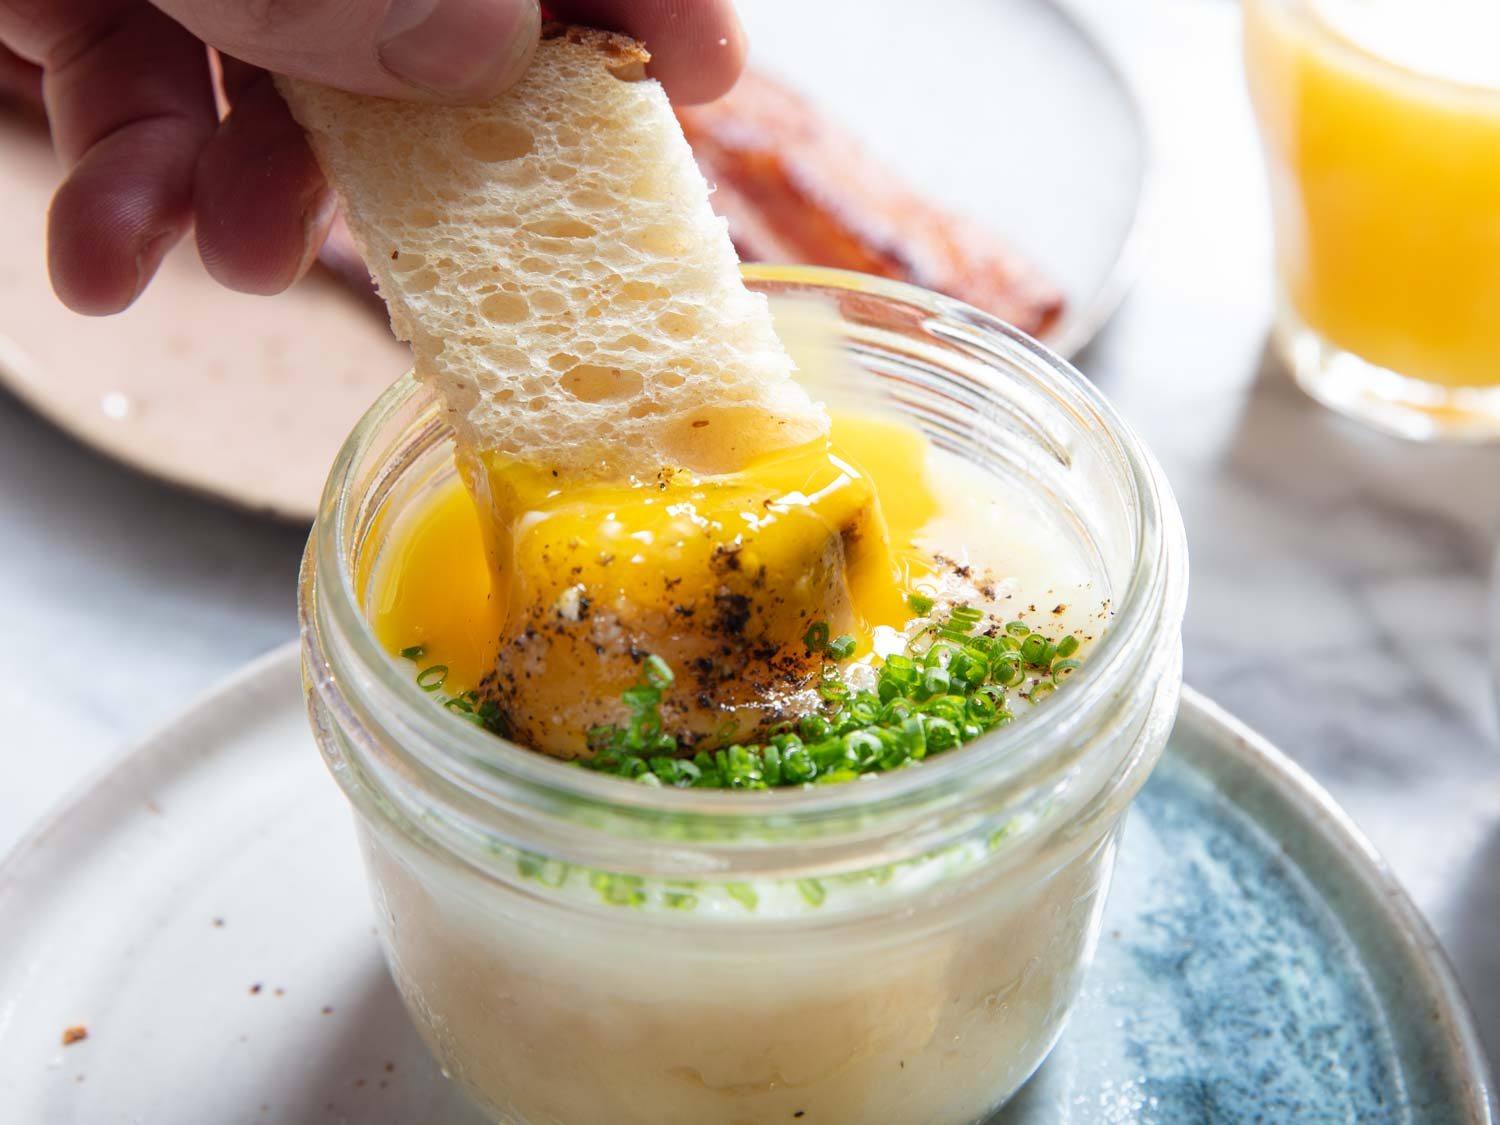 Closeup side view of toast being dipped into a potato-egg jar, breaking the custardy egg yolk.